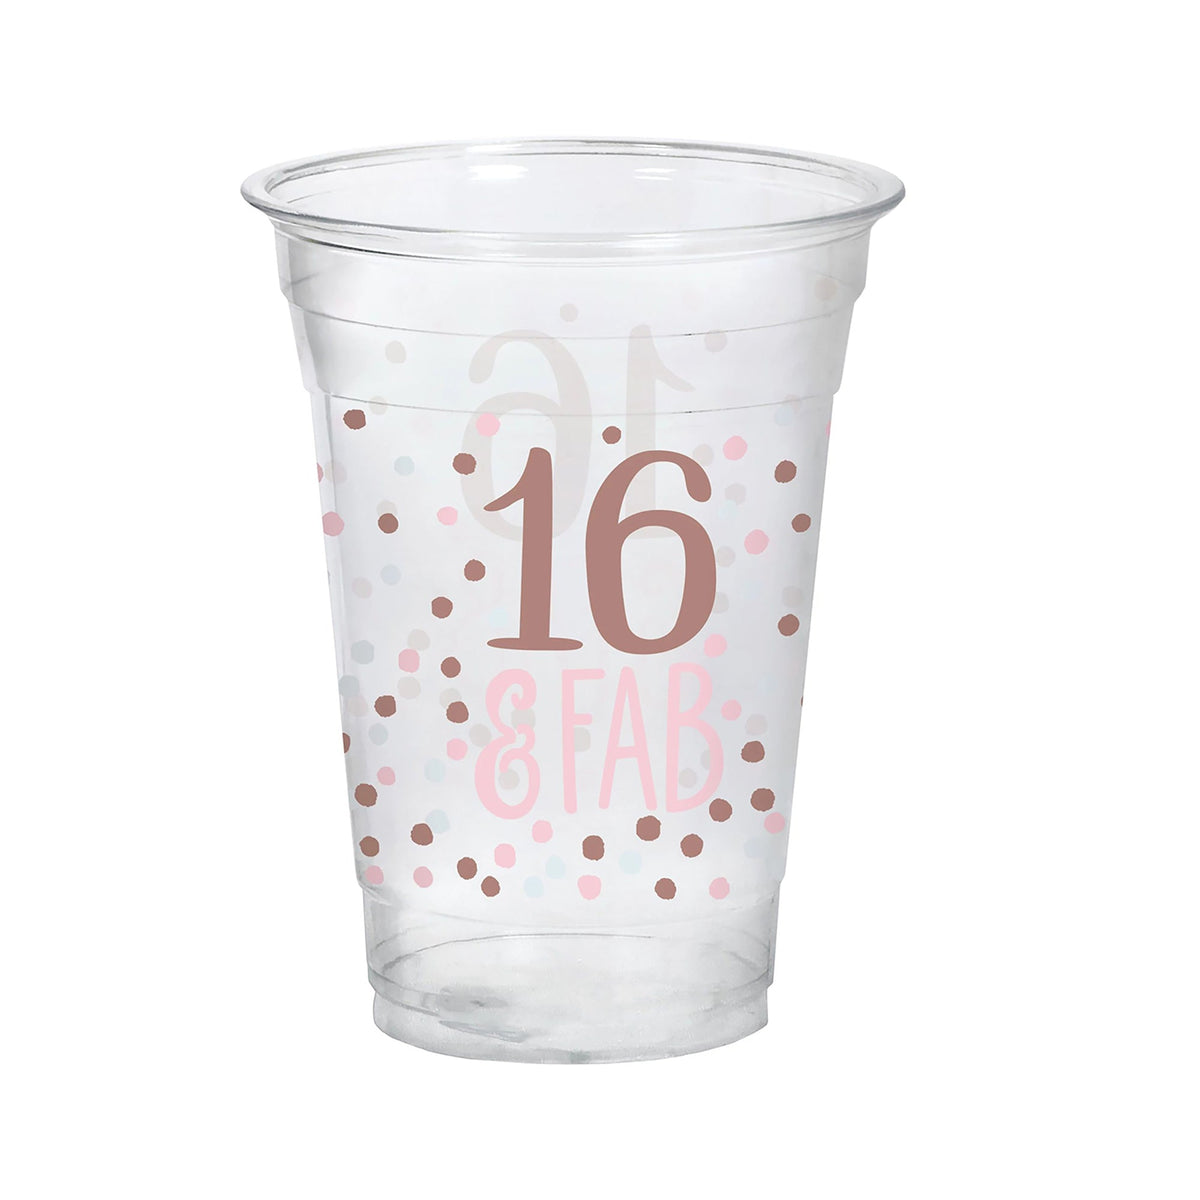 AMSCAN CA General Birthday Blush Sixteen Birthday Party Plastic Cups, 16 Oz, 8 Count